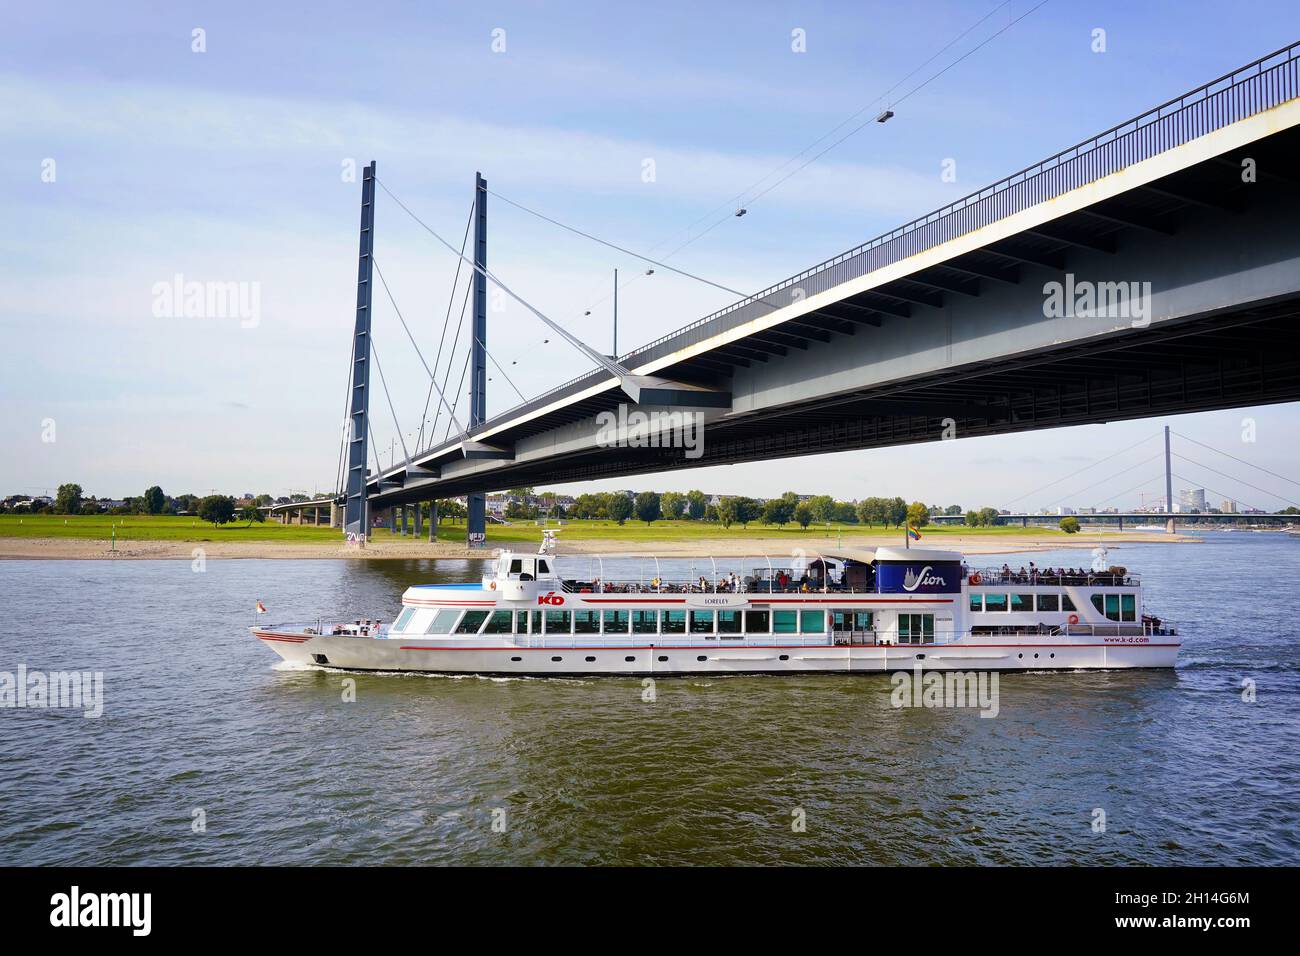 Cruise/excursion ship at Rhine river in Düsseldorf, Germany. Stock Photo